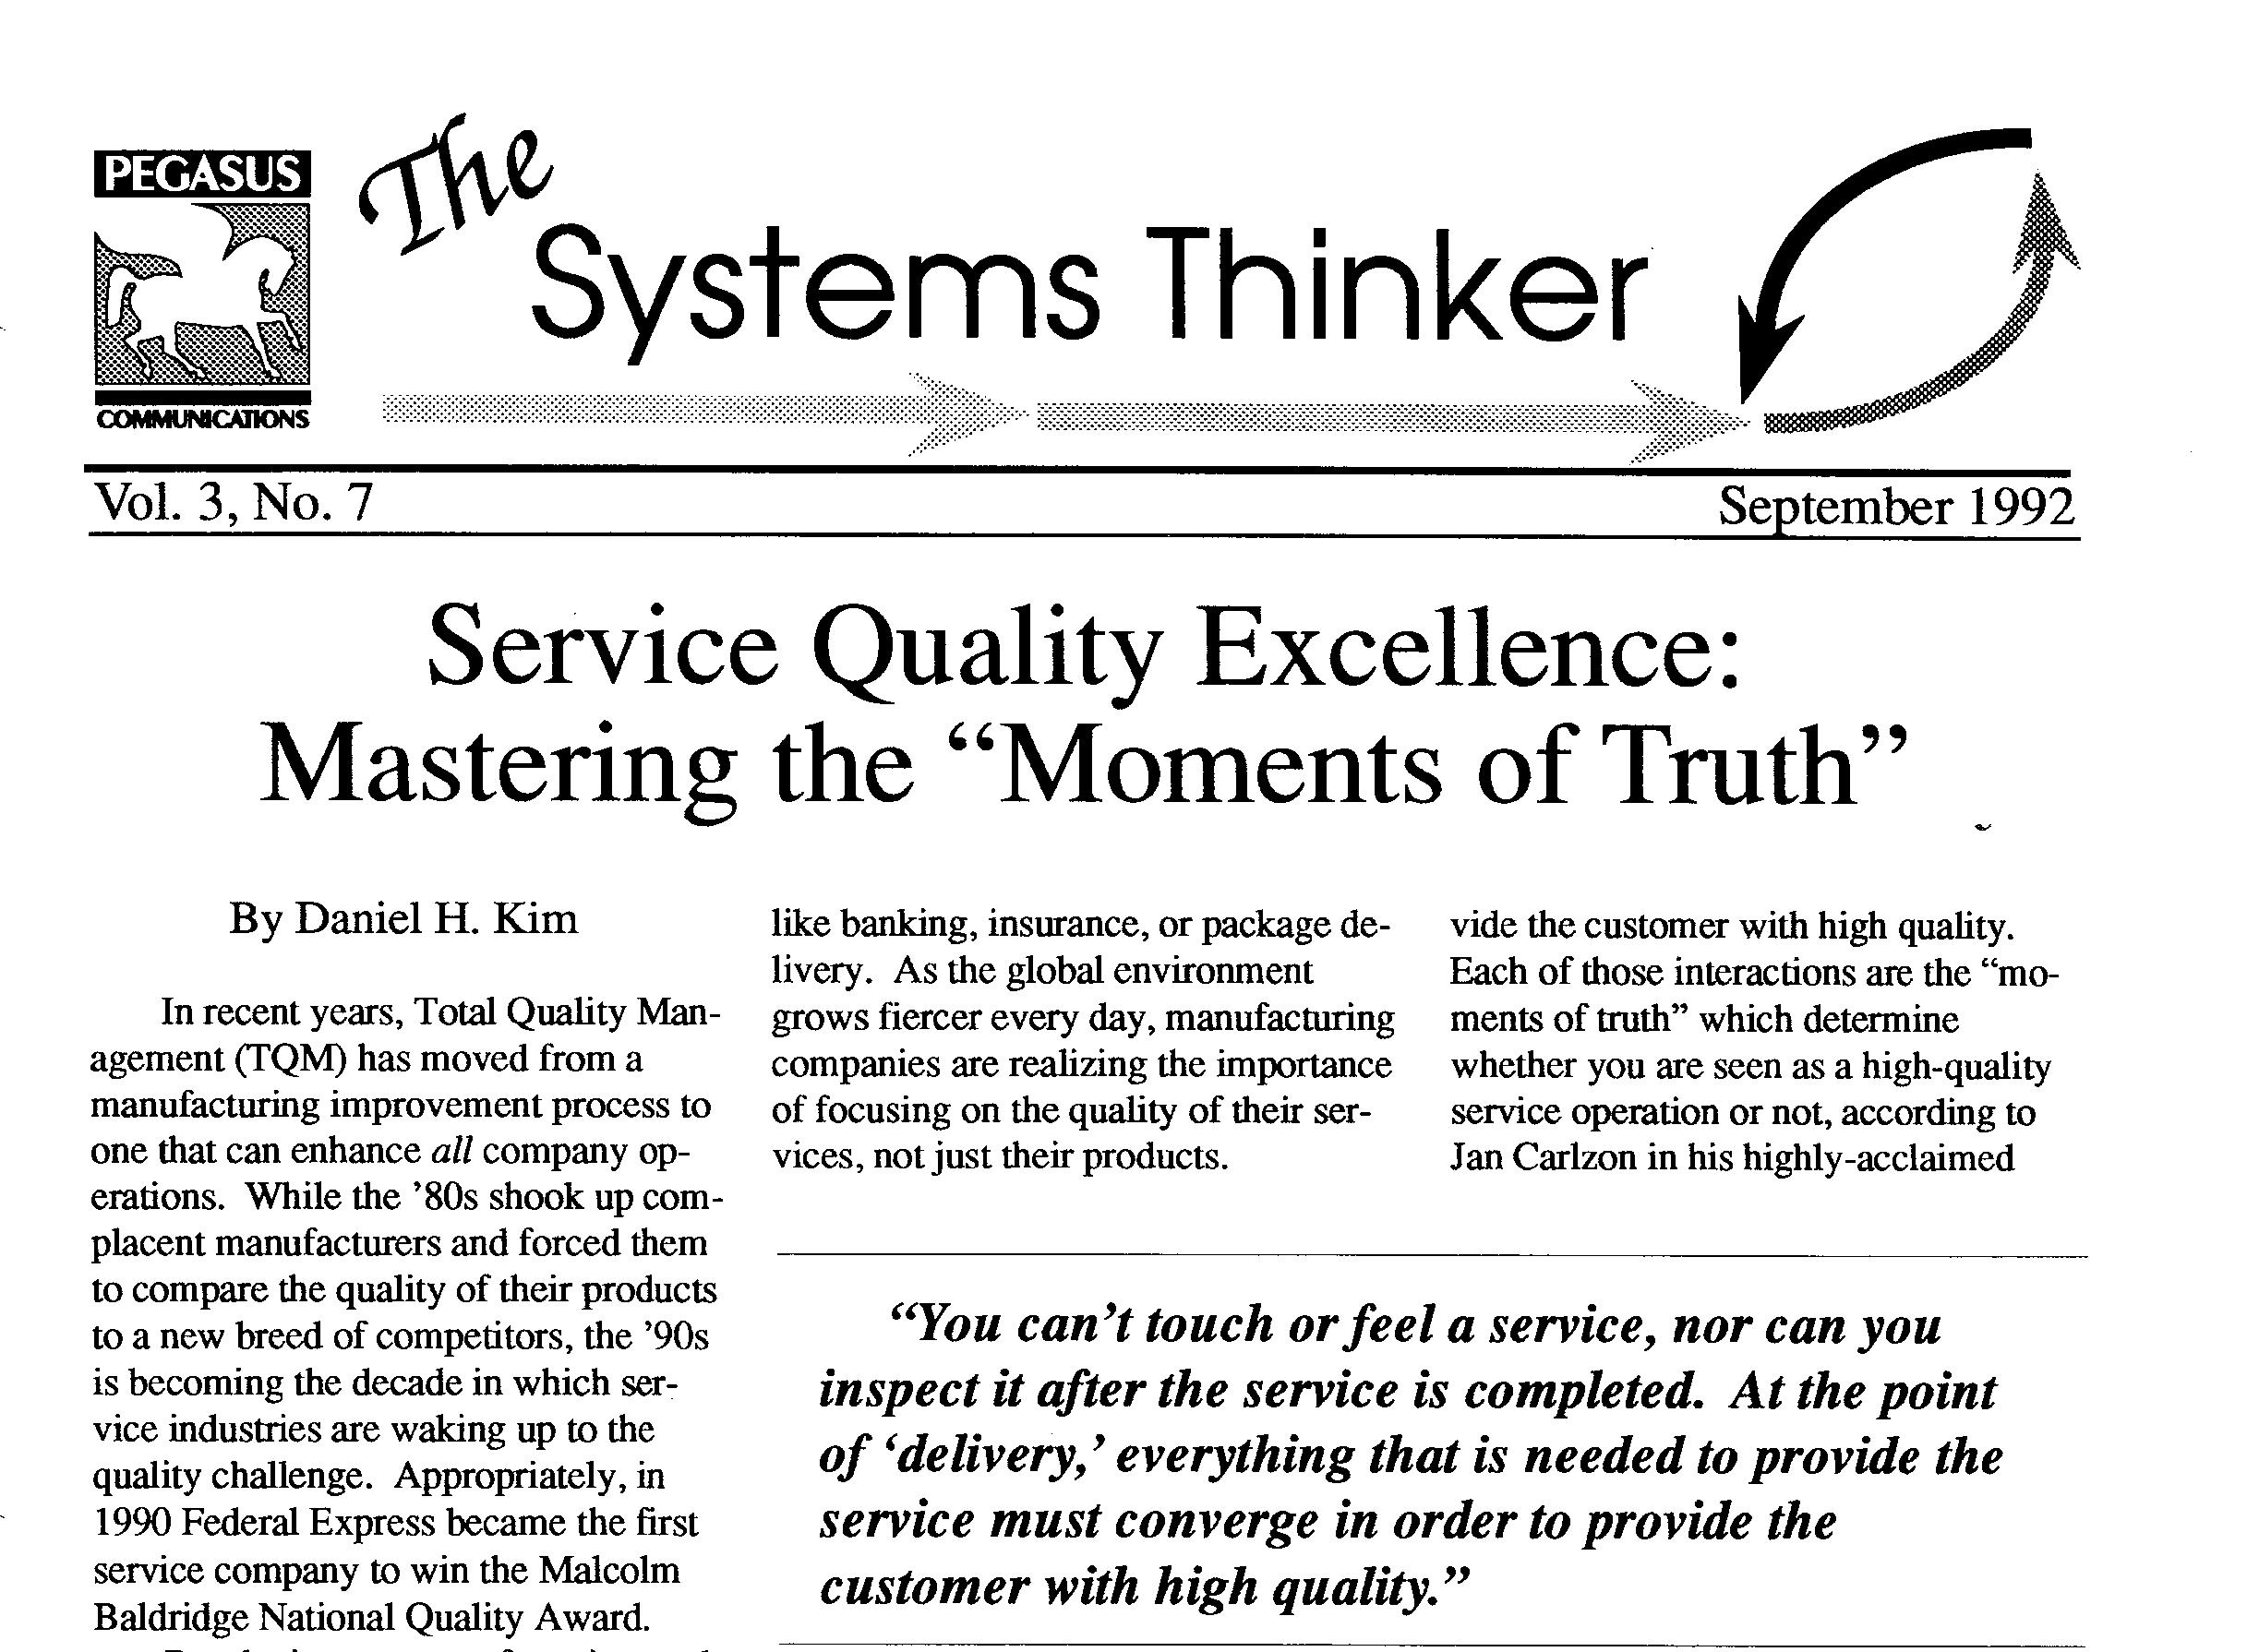 The Systems Thinker – Service Quality Excellence: Mastering the